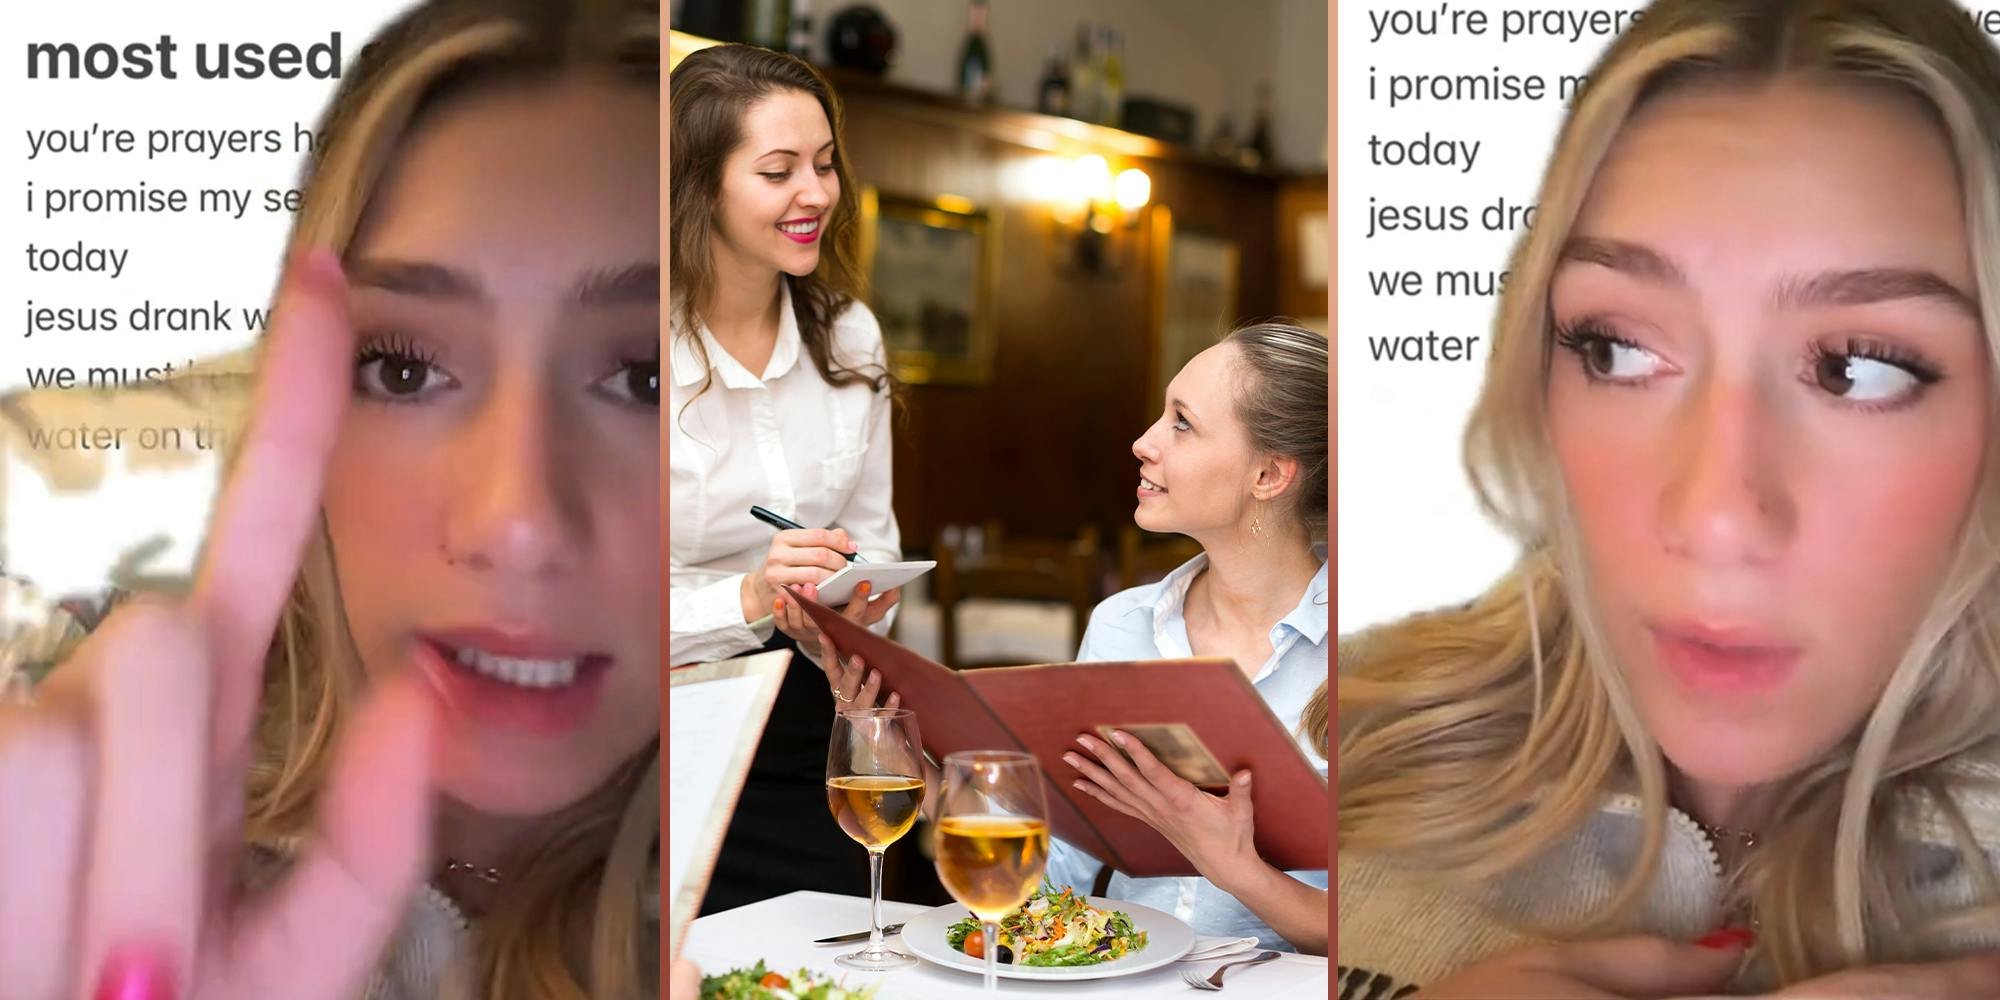 'All of these could go so wrong': Server shares what secret things she does to get customers to tip 20%